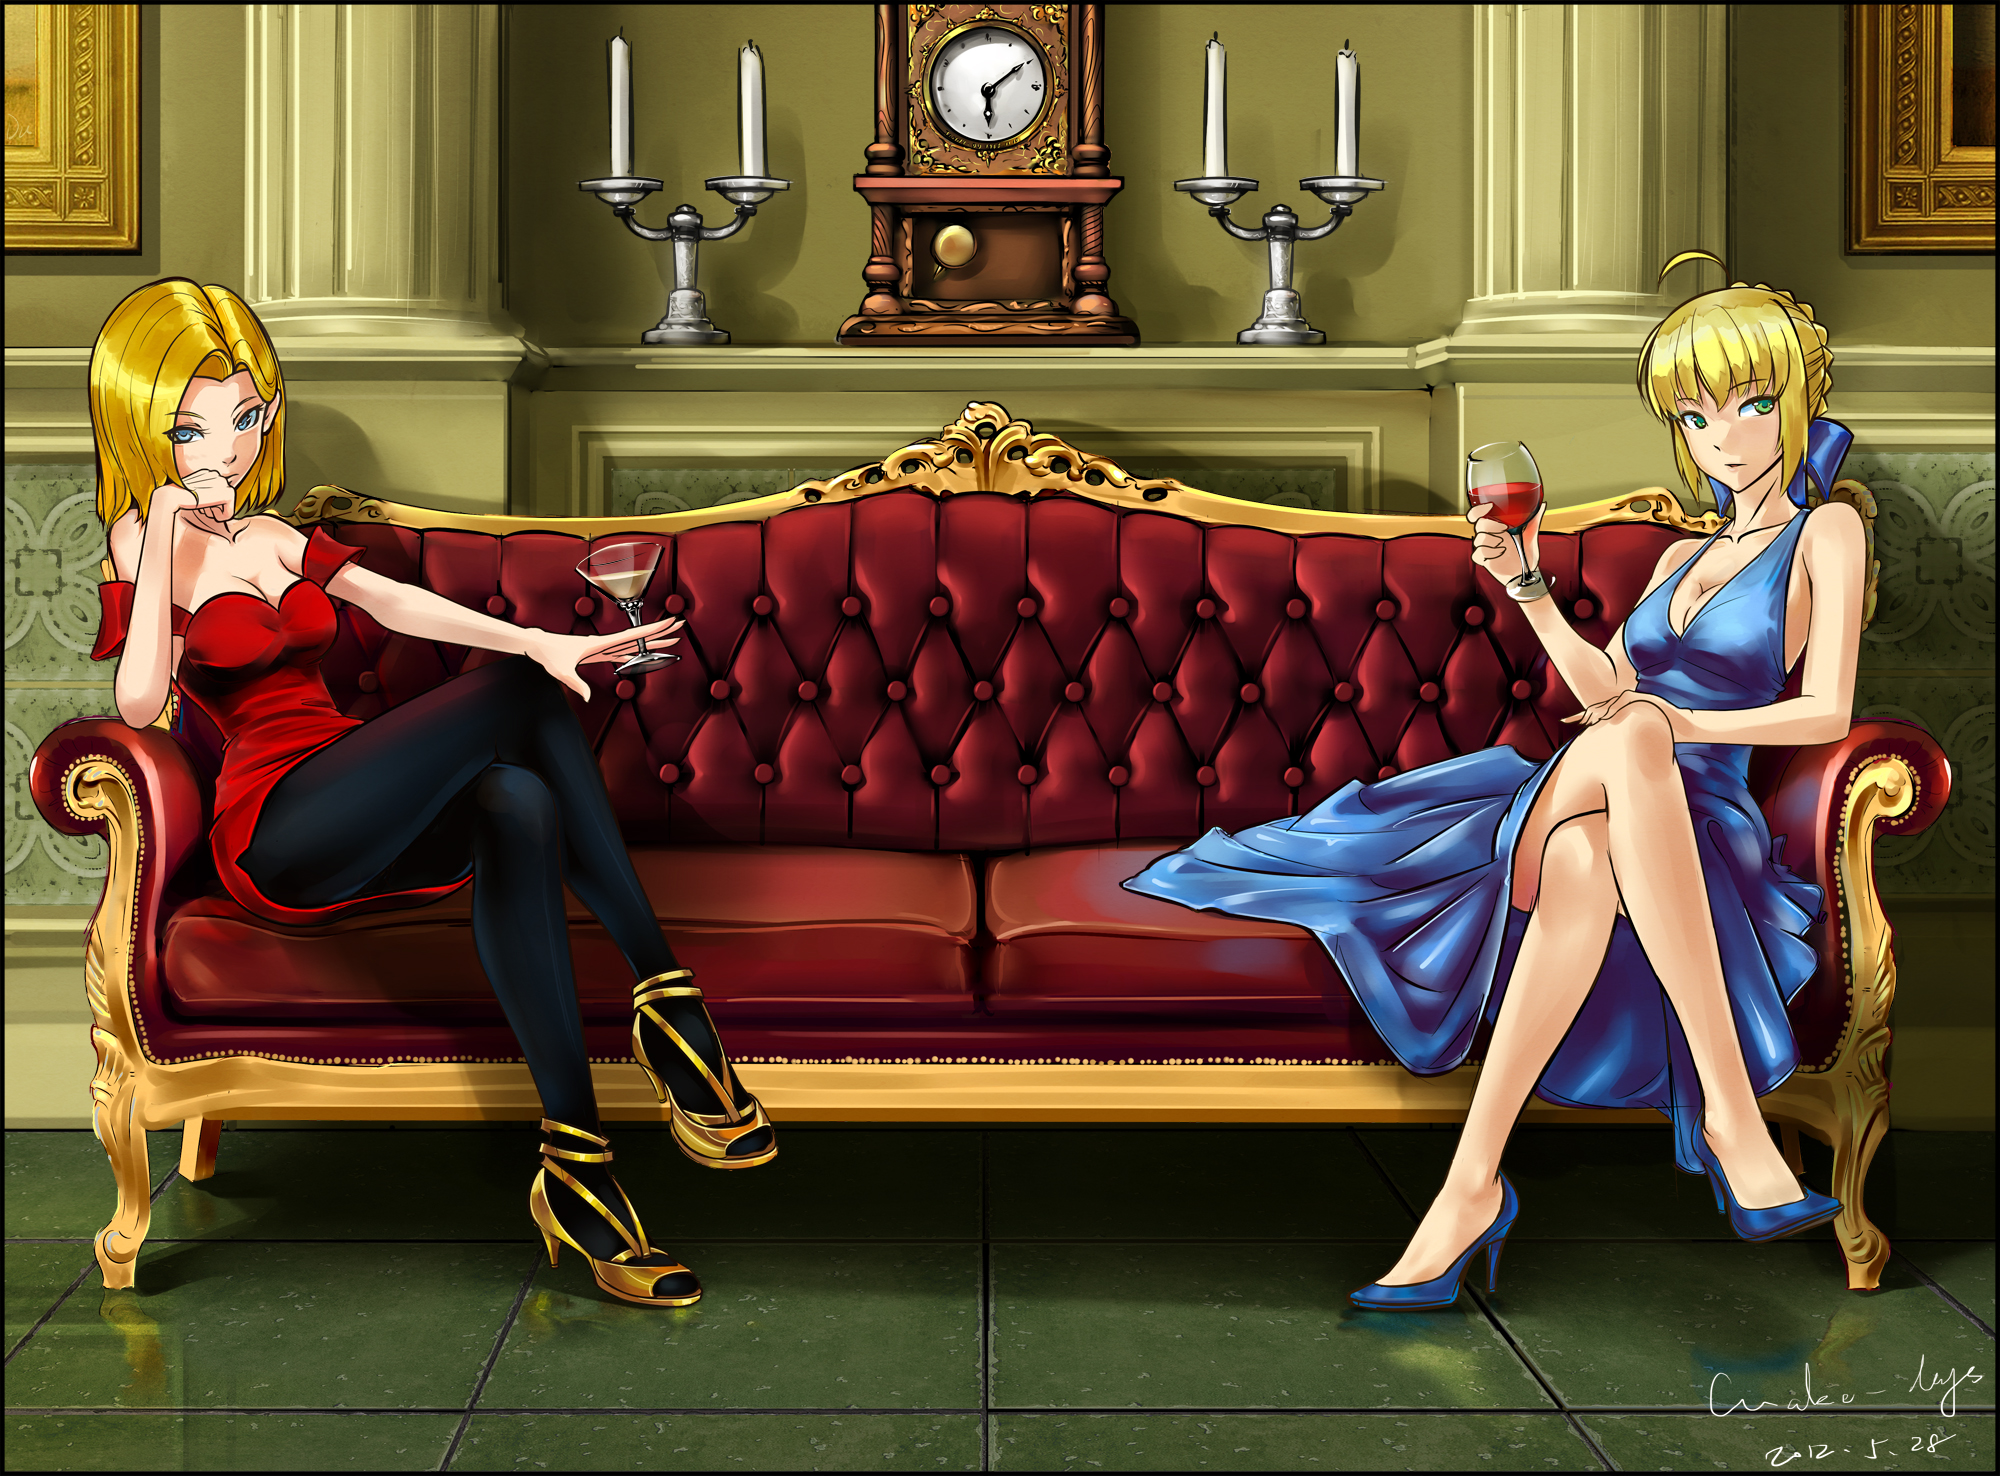 Saber Fate Series Android 18 Dragon Ball Fate Stay Night Dragon Ball Dragon Ball Z 2000x1476